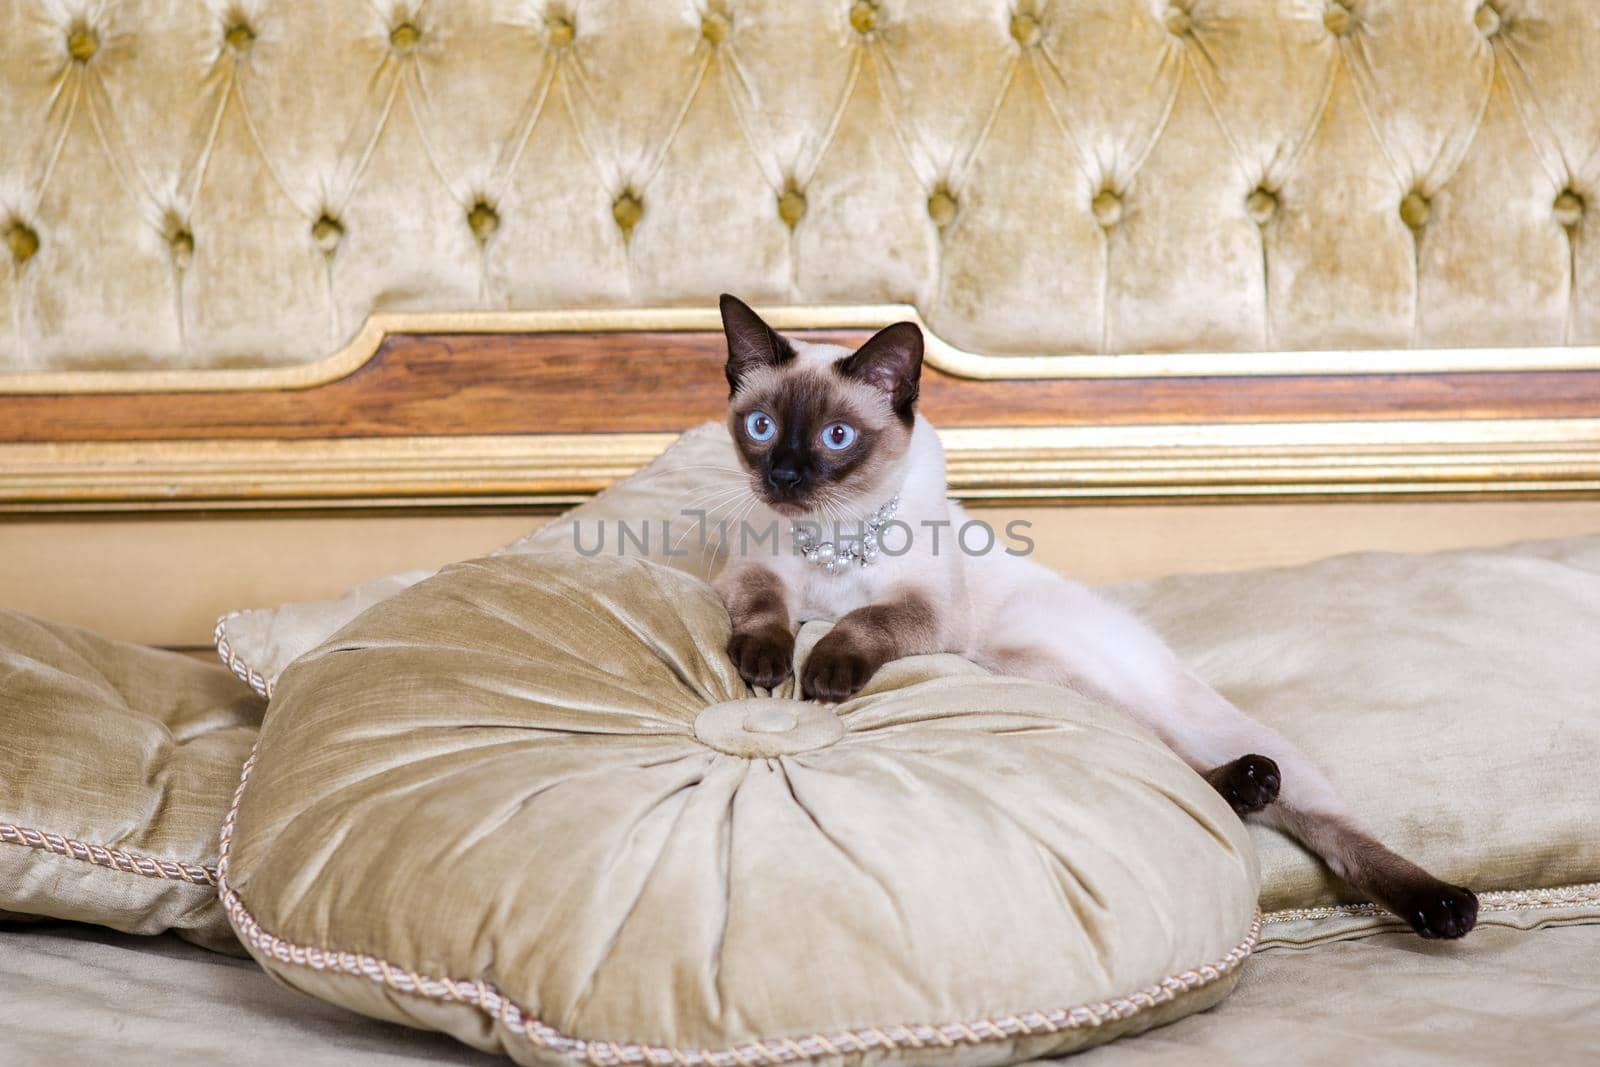 The theme is luxury and wealth. Young cat without a tail thoroughbred Mecogon bobtail lies resting on a big bed on a pillow in a Renaissance Baroque interior in France Europe Versailles Palace.